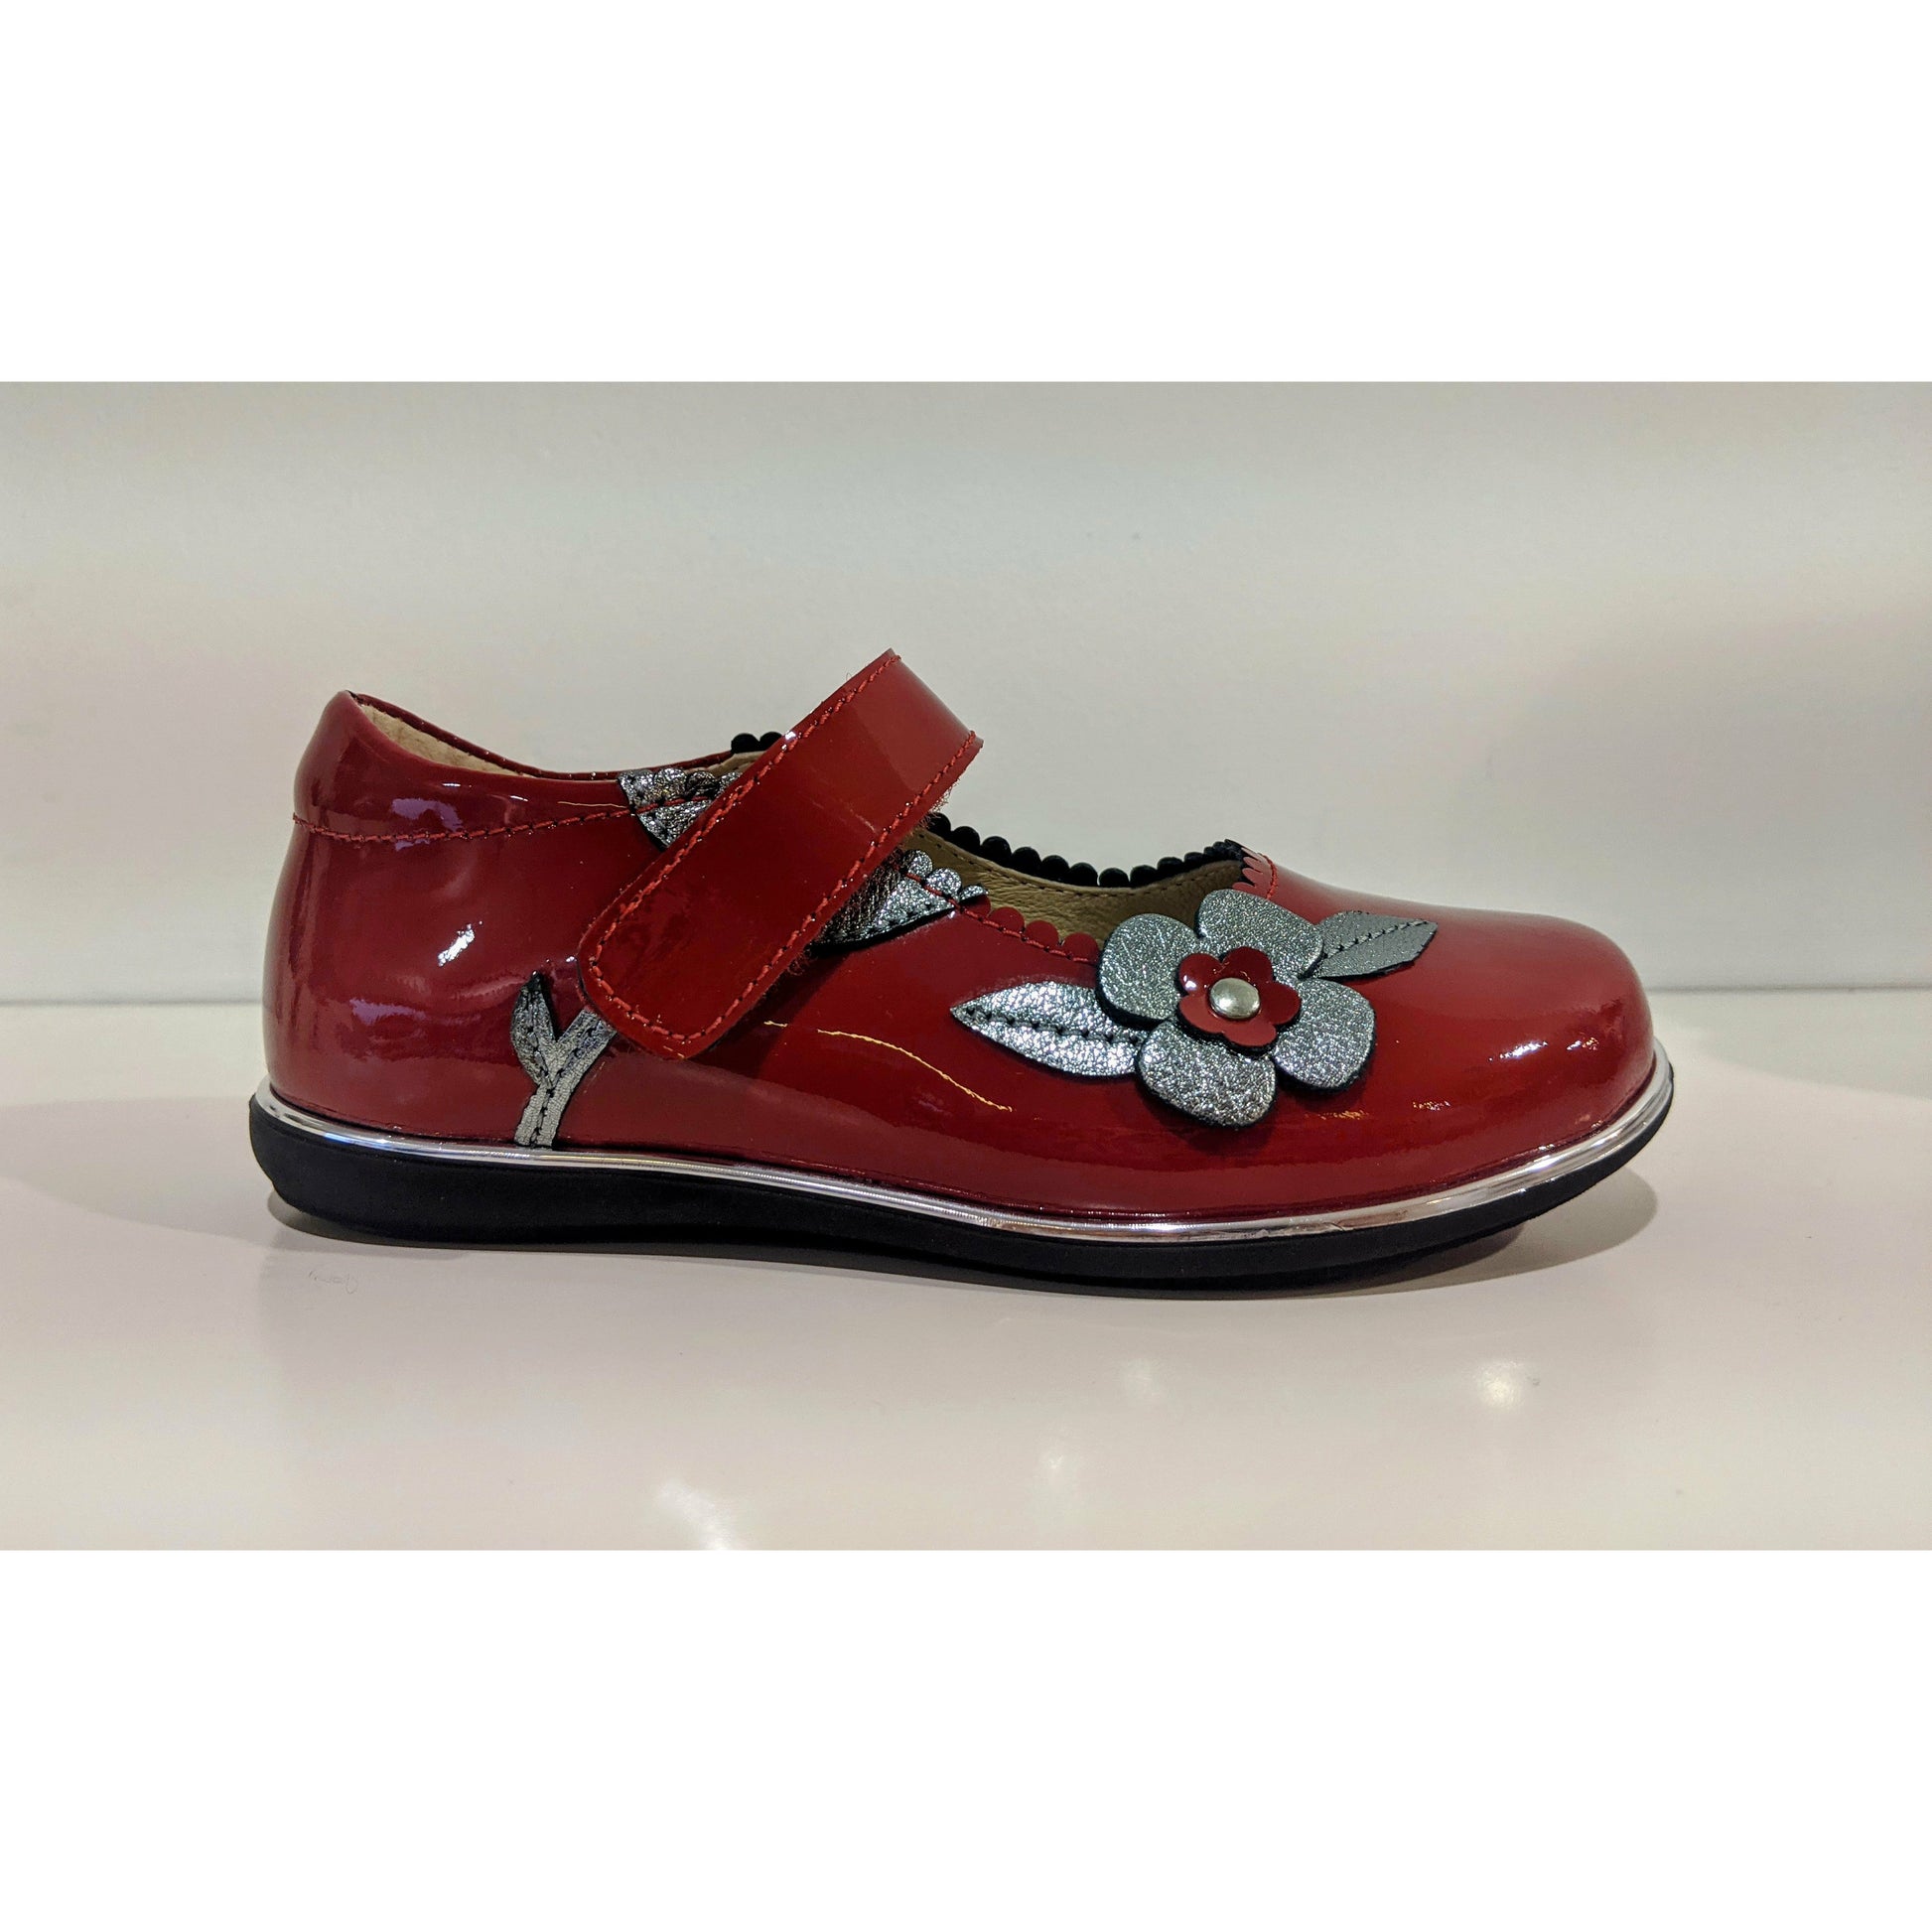 A girls Mary Jane shoe by Petasil,style Caren, in red patent and silver with velcro fastening. Right side view.